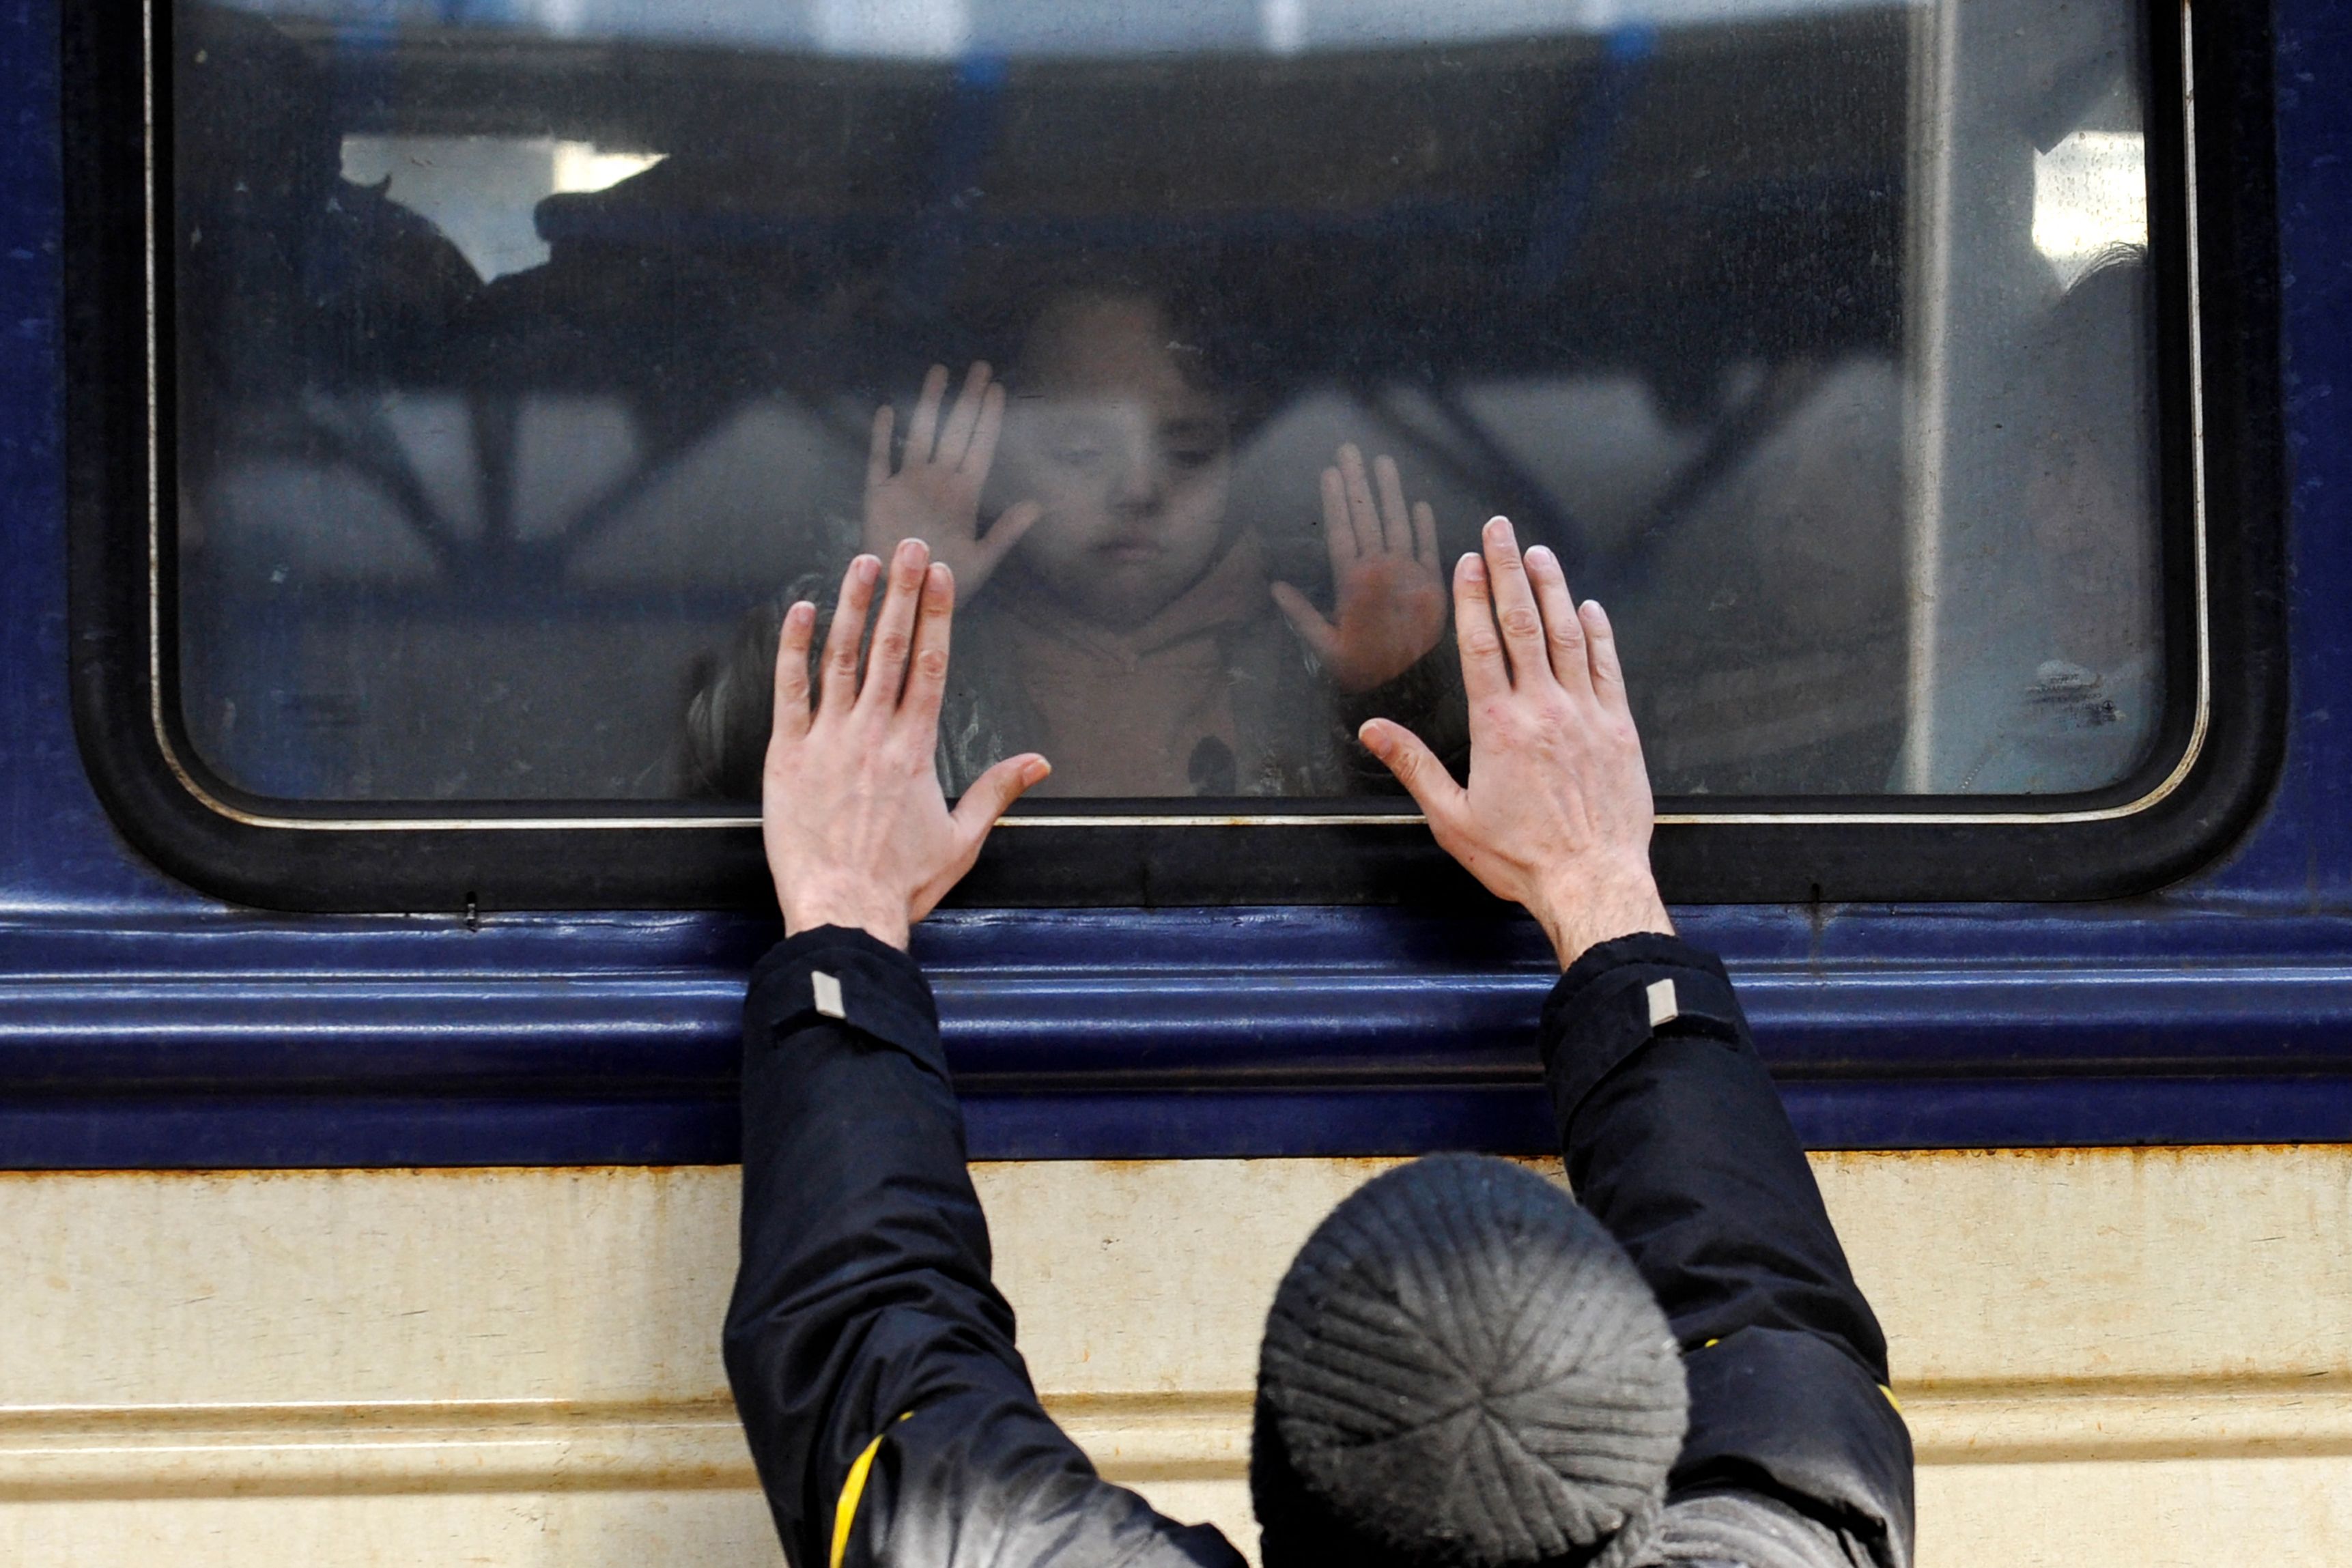 A man gestures in front of an evacuation train at Kyiv central train station on March 4, 2022. (Sergei Chuzavkov—AFP/Getty Images)